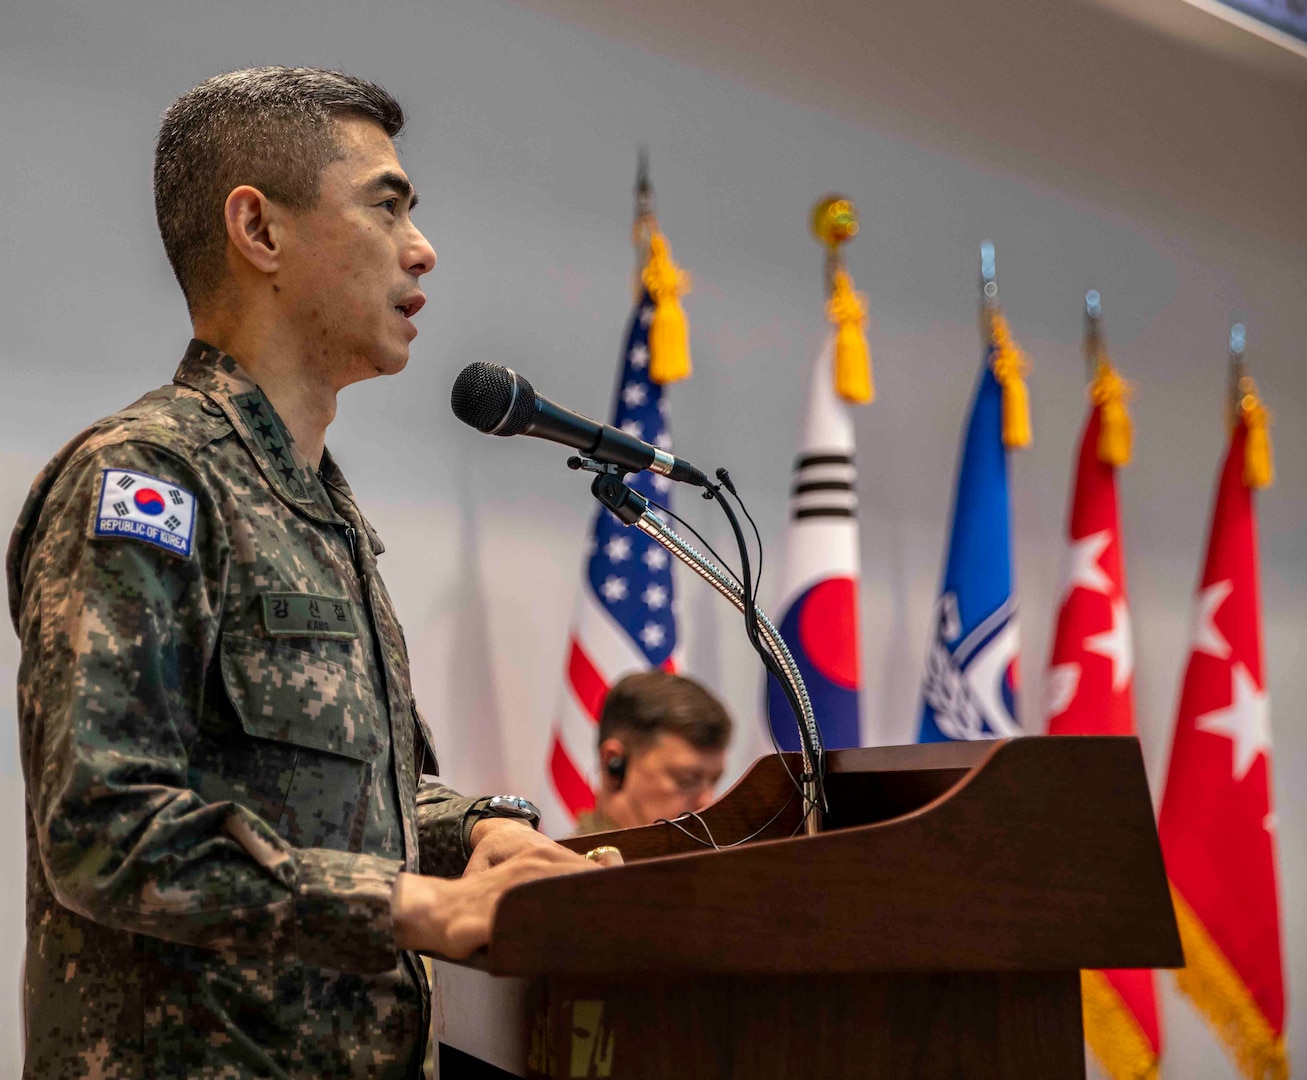 Gen. Shin Chul Kang, deputy commander, Combined Forces Command (CRC), delivers remarks during a ceremony honoring the 45th Anniversary of the formation of the CFC, during a ceremony on U.S. Army Garrison-Humphreys Nov. 7, 2023. (U.S. Army photo by: Cpl. Jorge Reyes, Eighth Army Public Affairs)